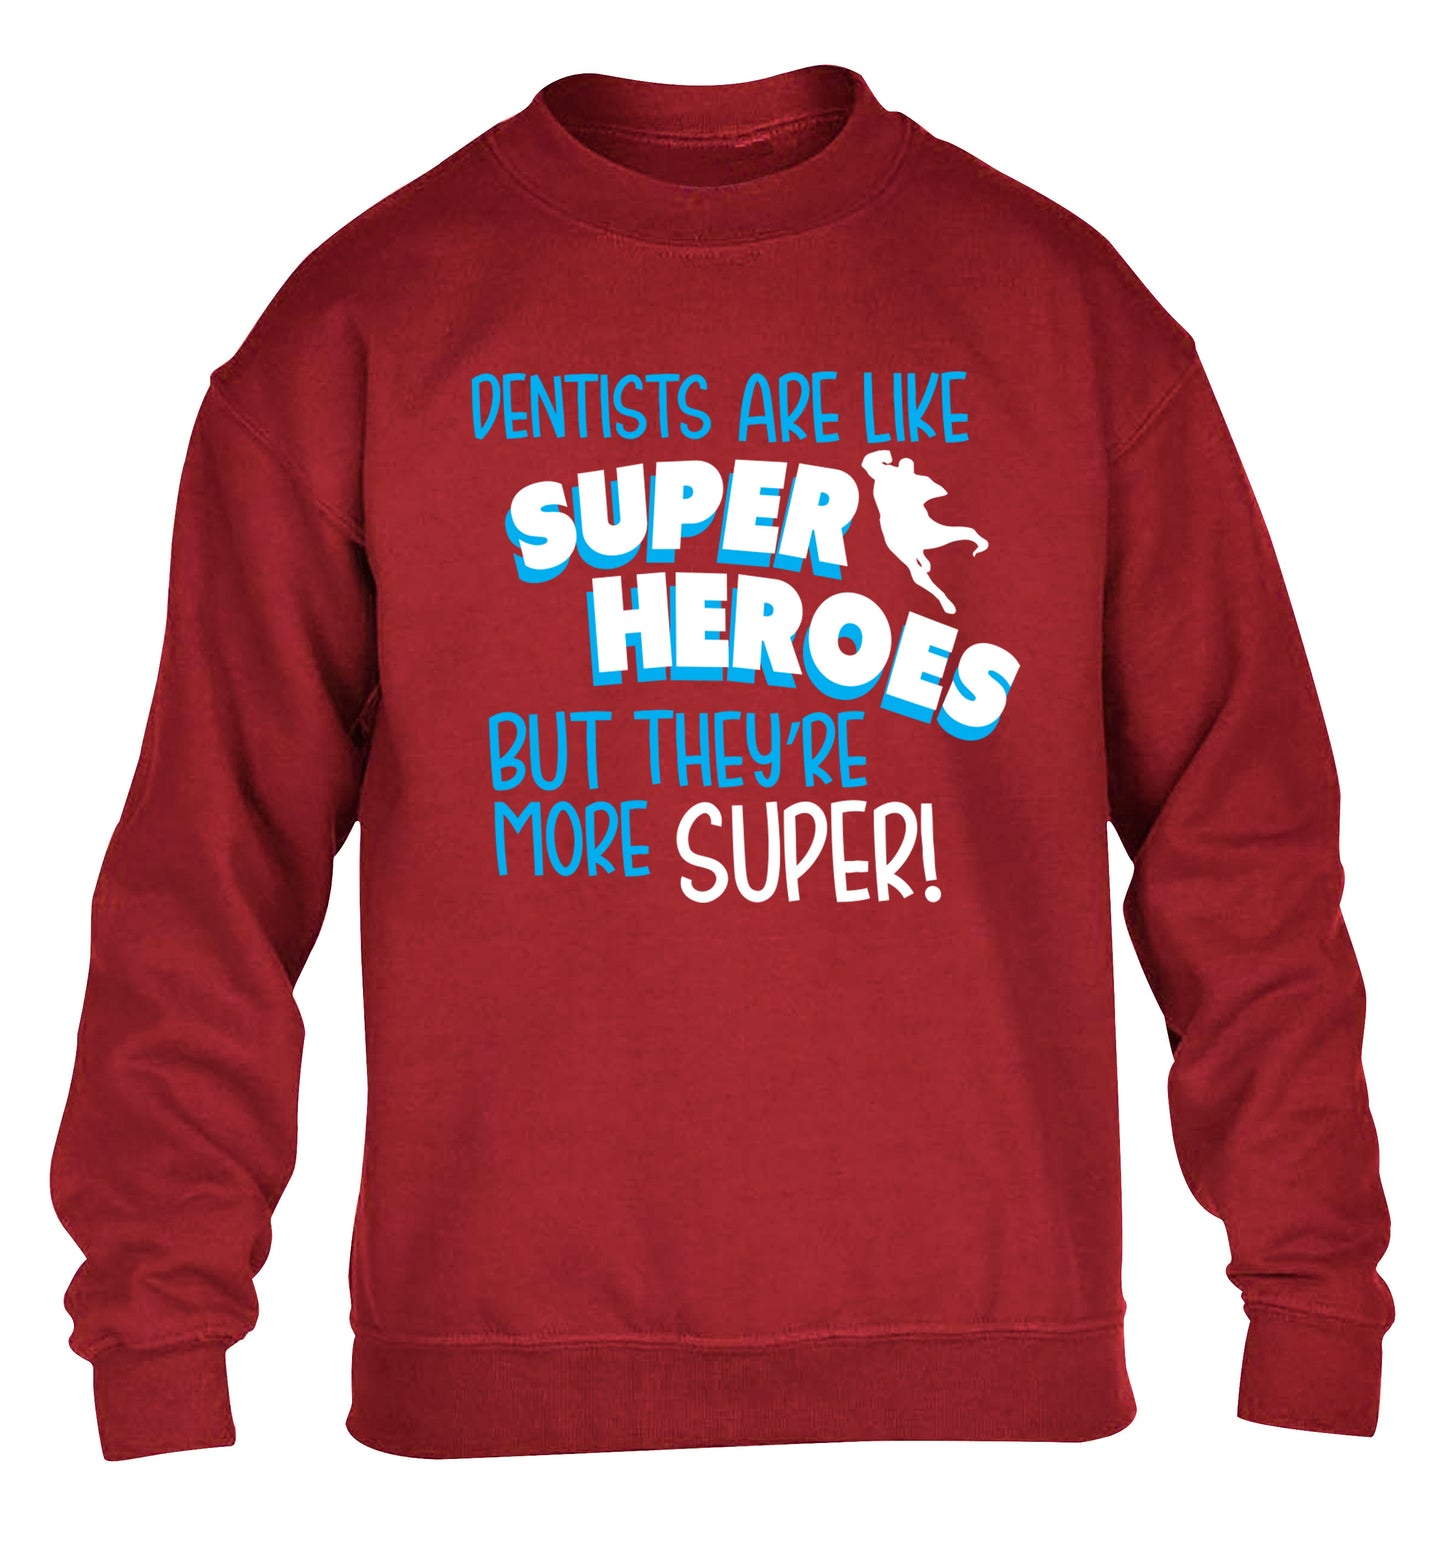 Dentists are like superheros but they're more super children's grey sweater 12-13 Years